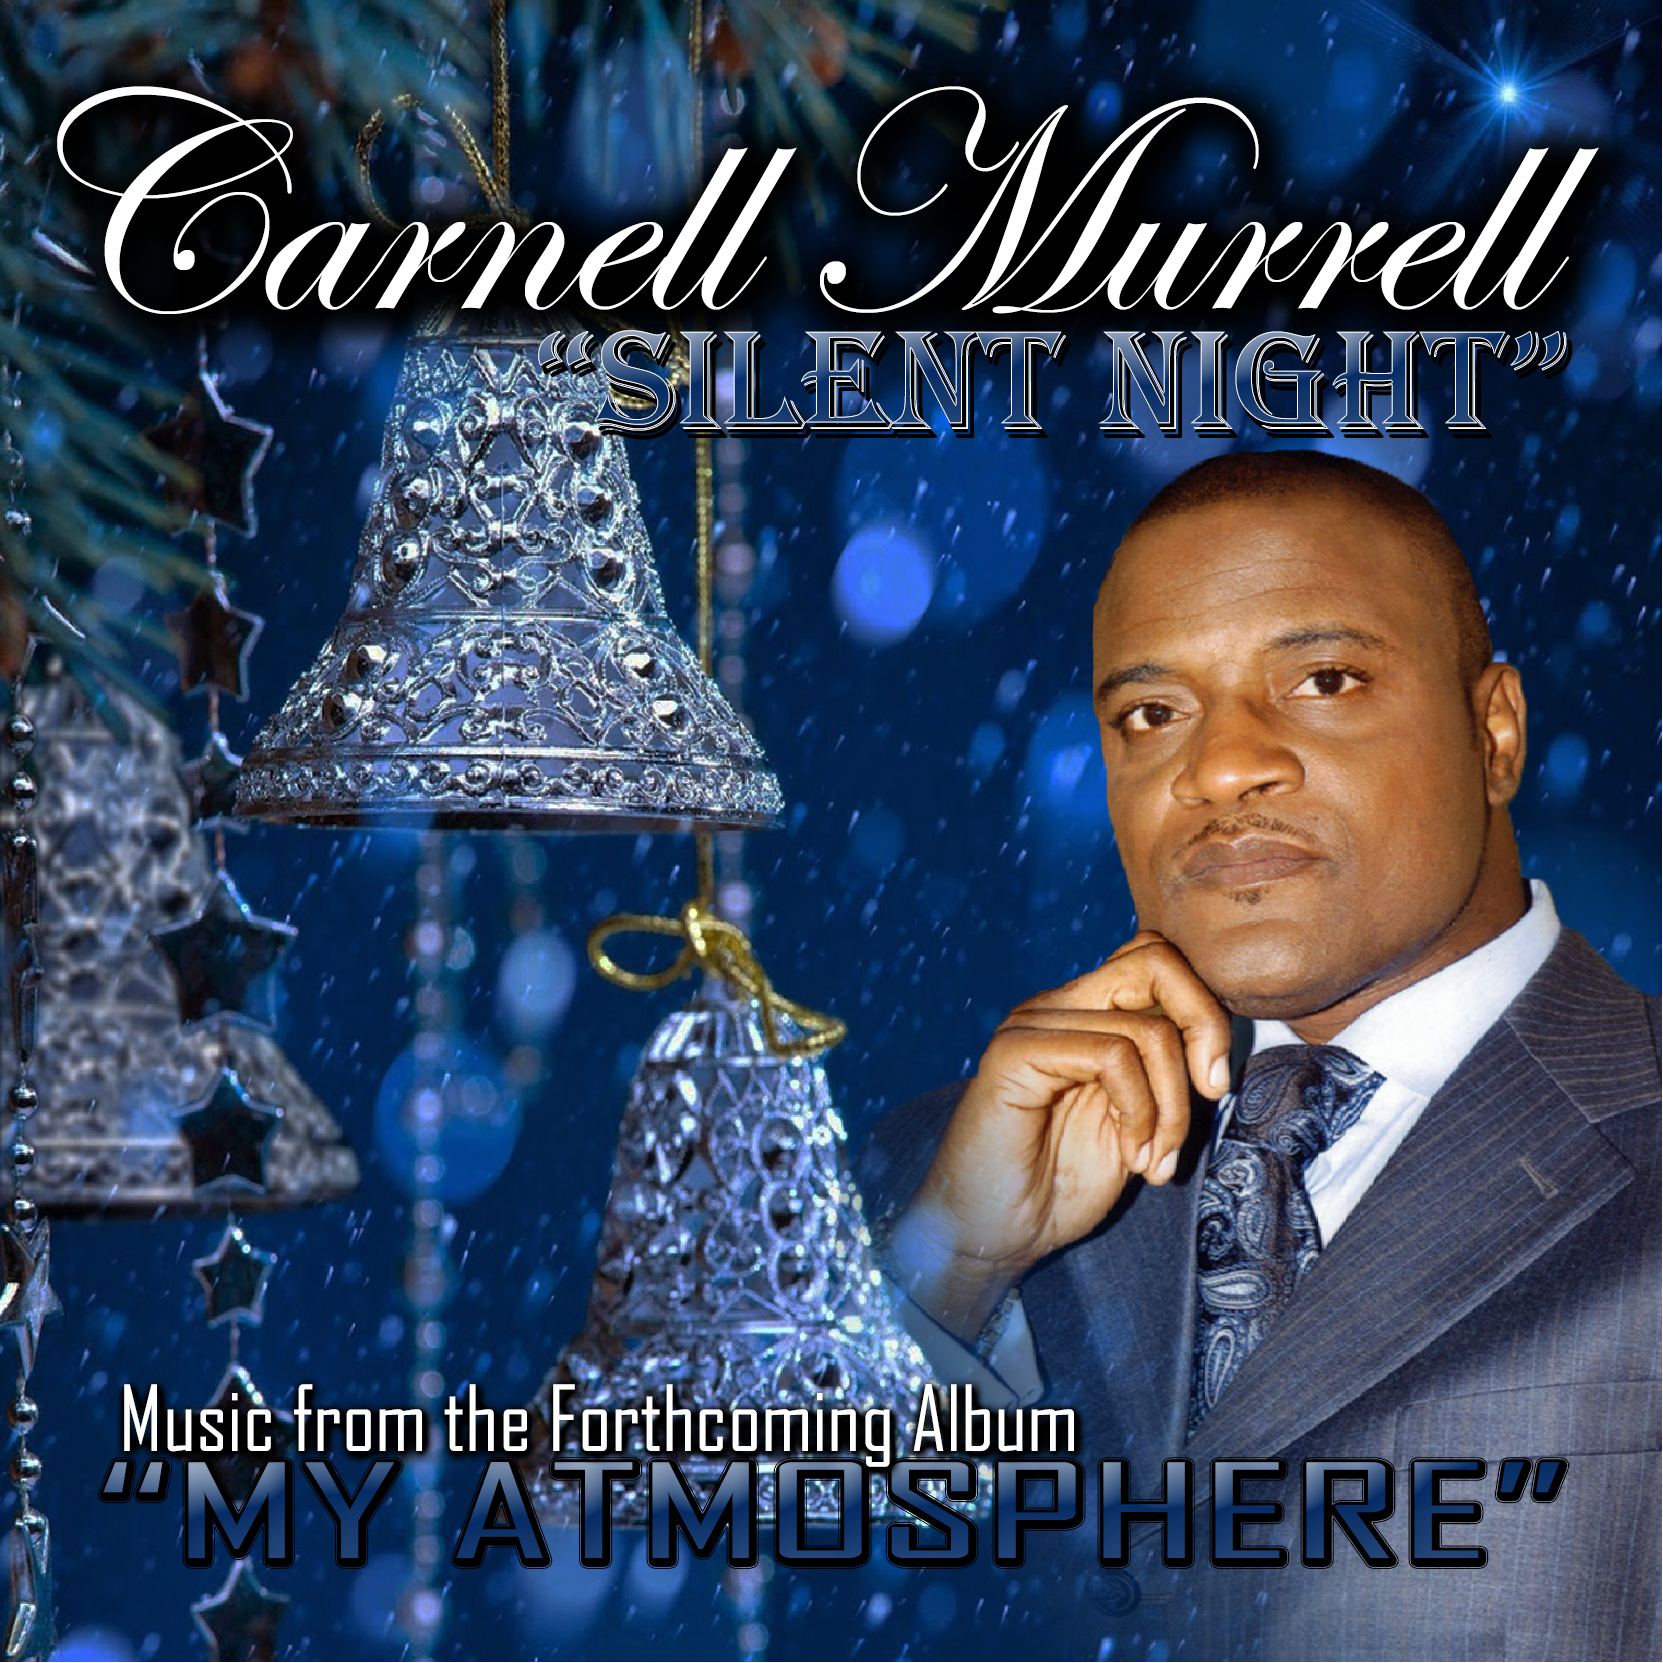 Art for Silent Night by Carnell Murrell